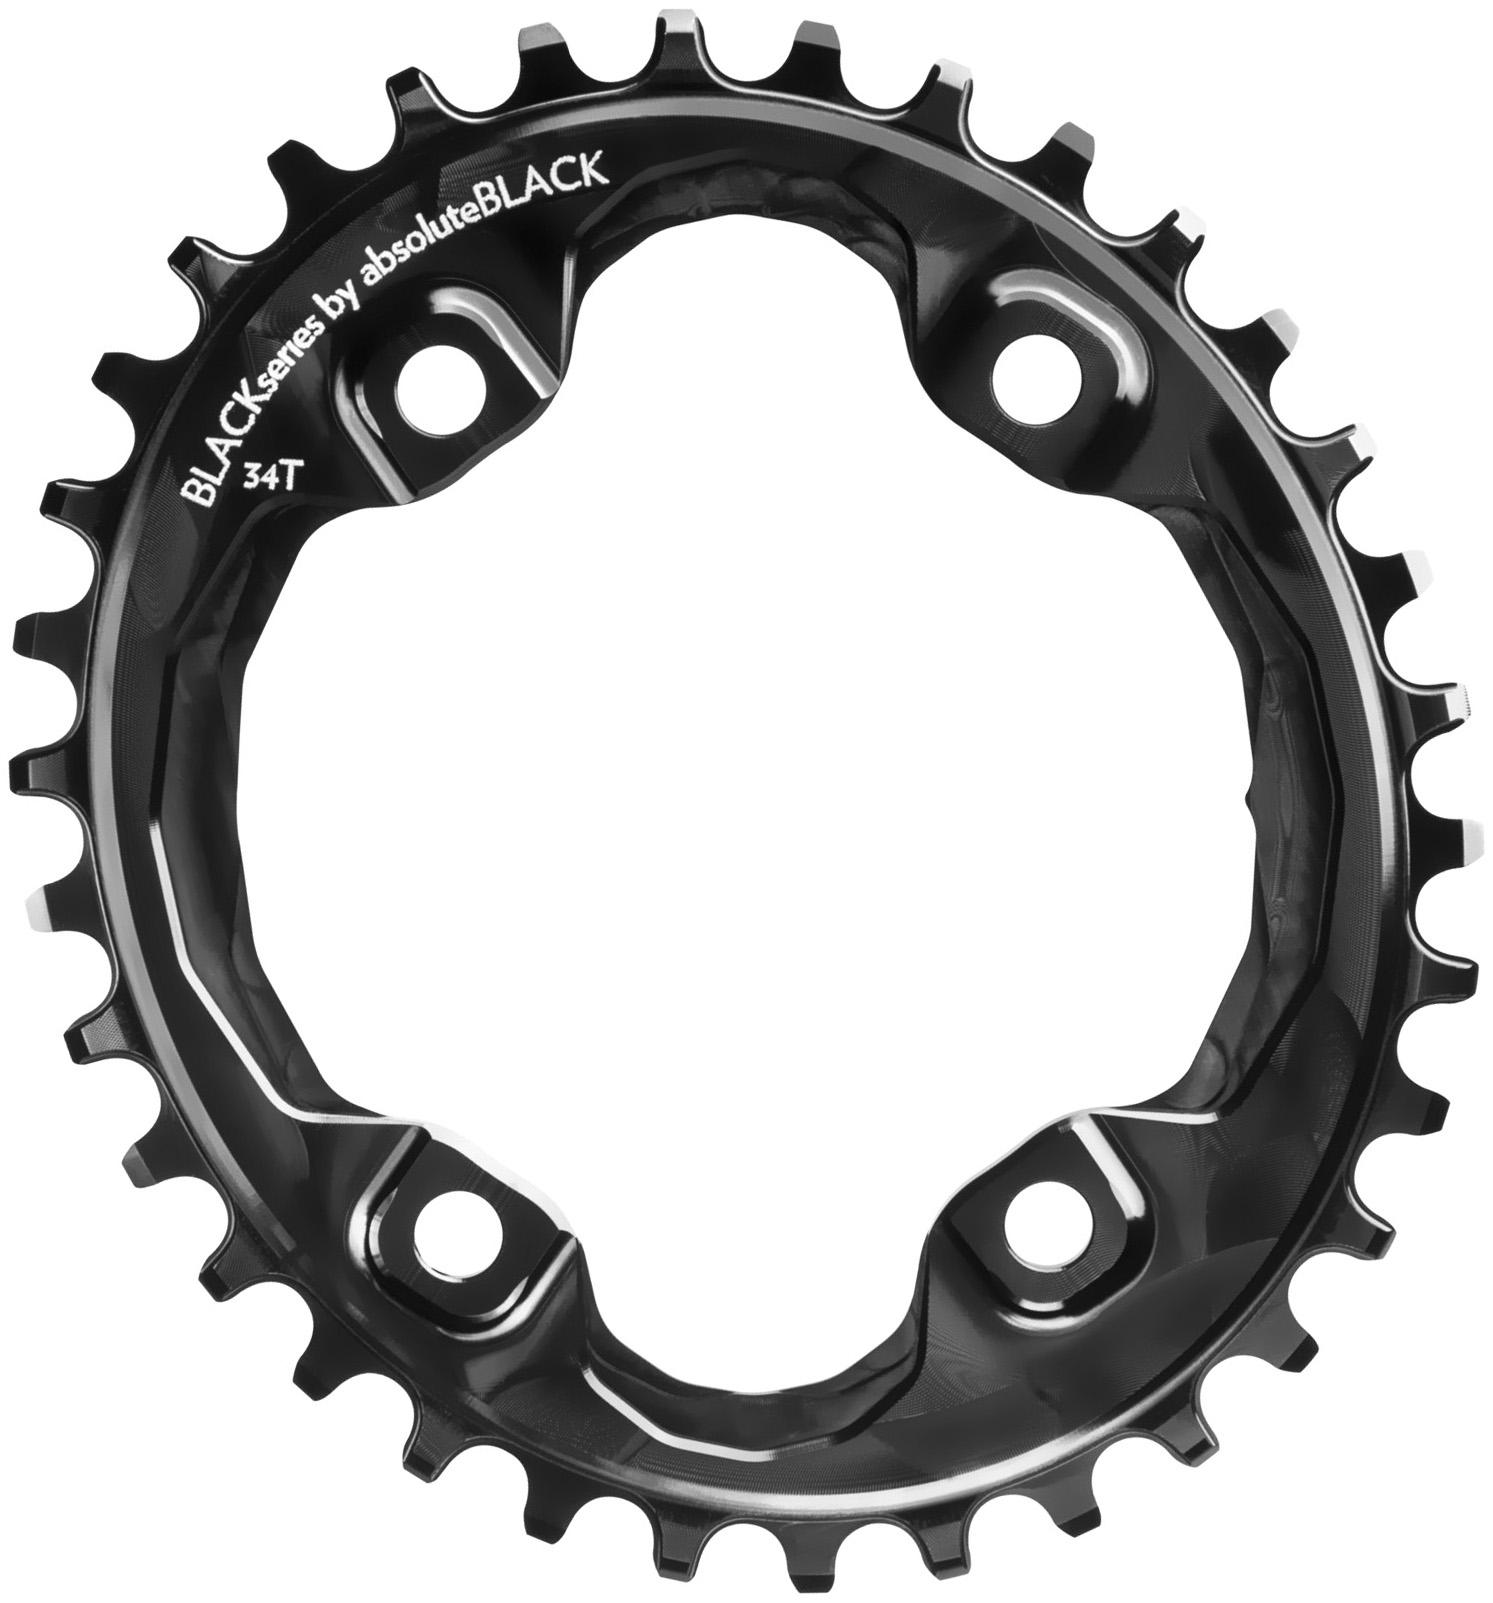 Black By Absolutebla Narrow Wide Oval Xt M8000 Chainring